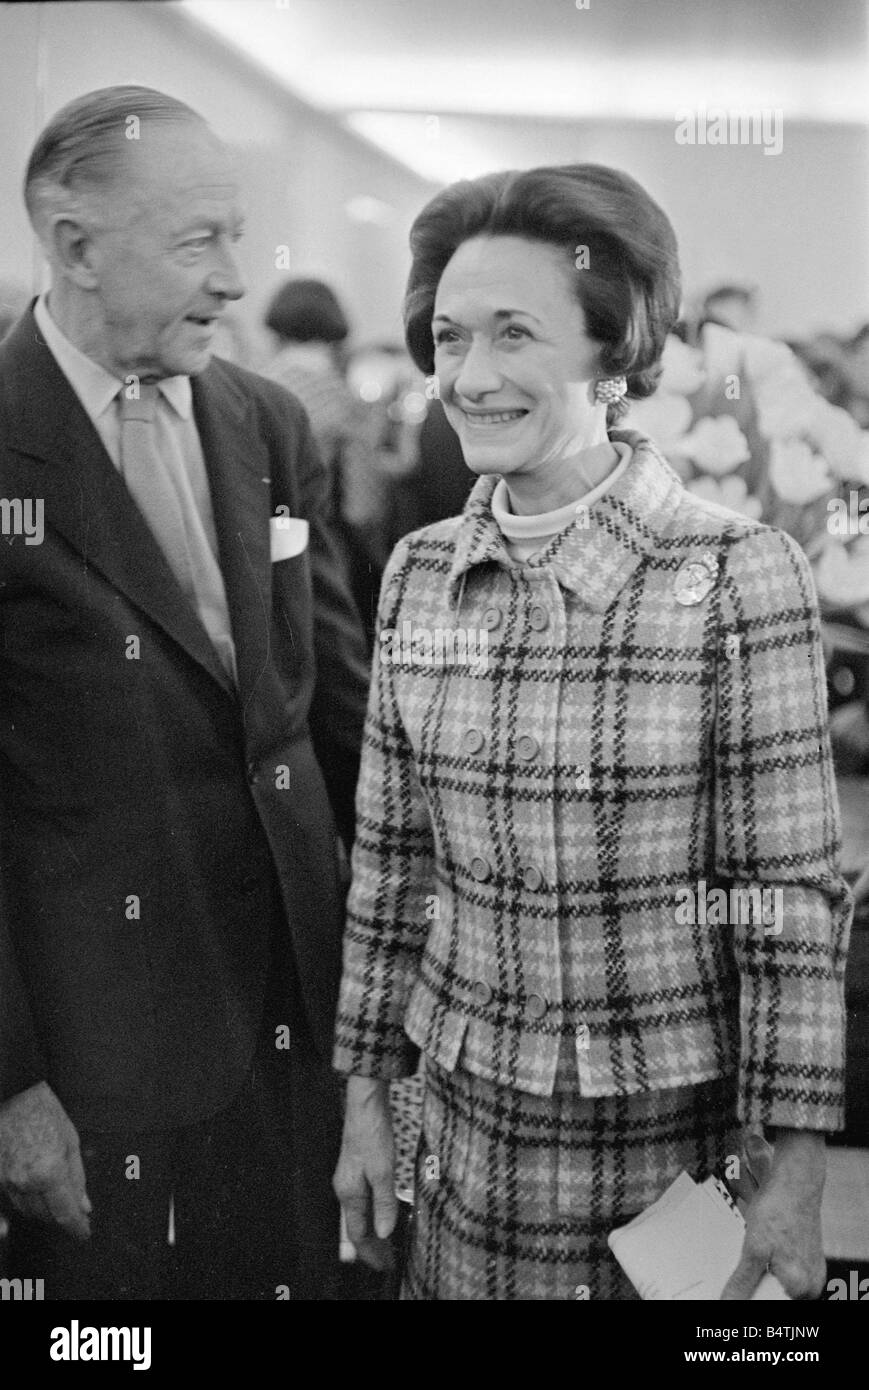 Duchess Of Windsor January 1967 Pictured at Fashion Show in Paris France with Captain Edward Molyneux Fashion Designer British Royalty 1960s Smiling Wallace Simpson Captain Molyneux Mirrorpix Stock Photo